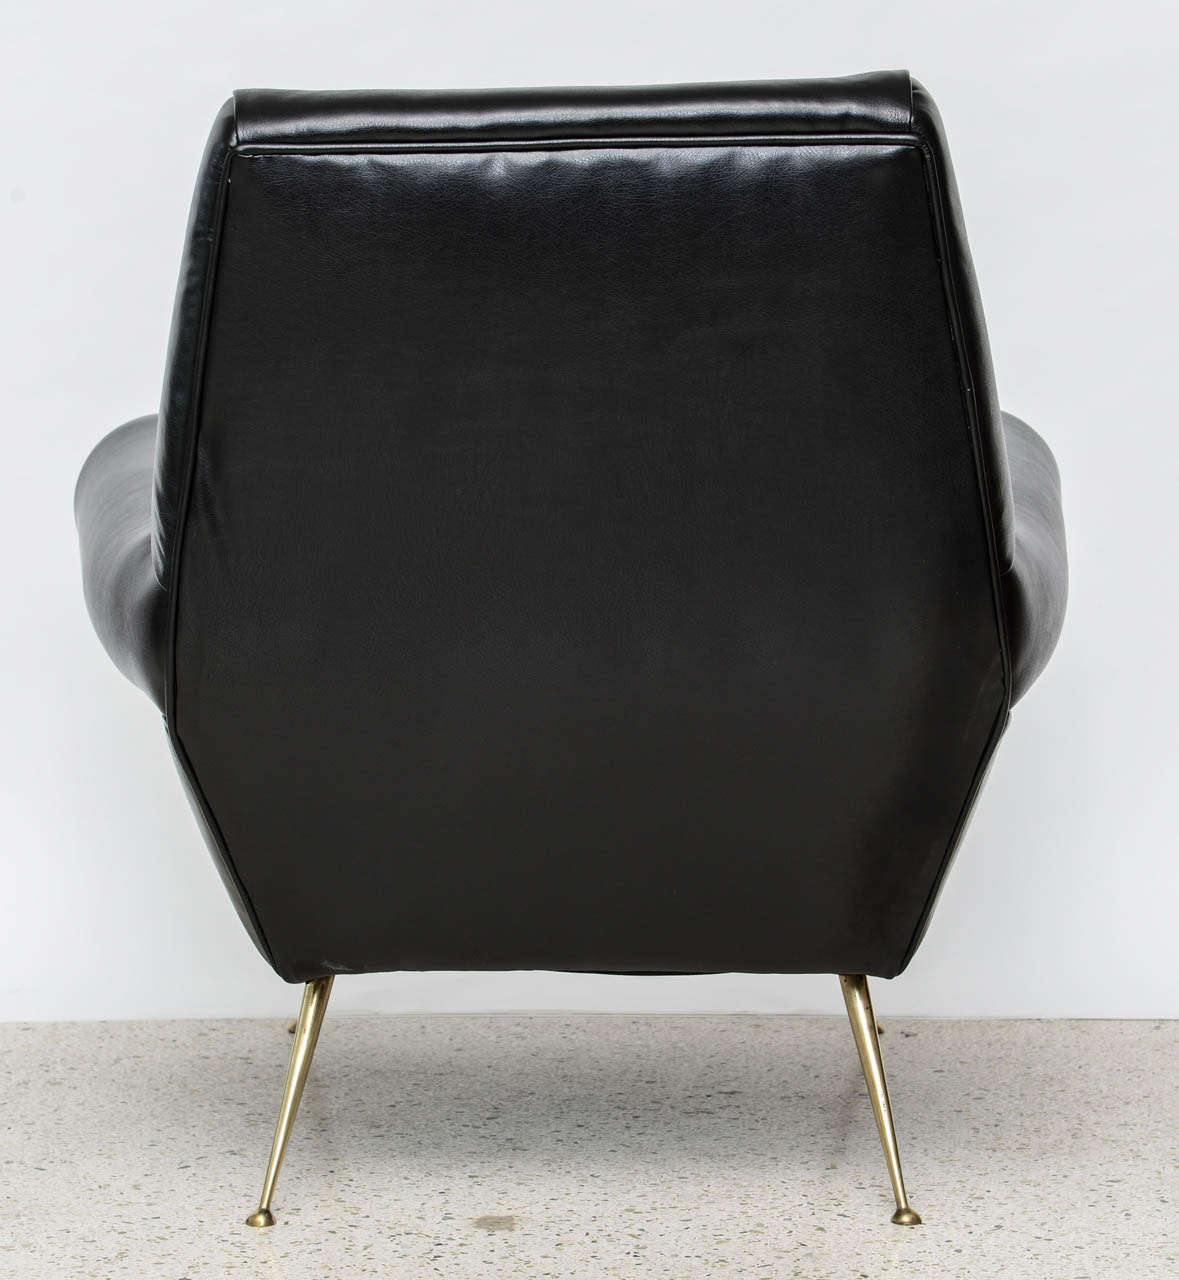 Pair of Italian Modern Leather and Brass Lounge Chairs, Minotti 1